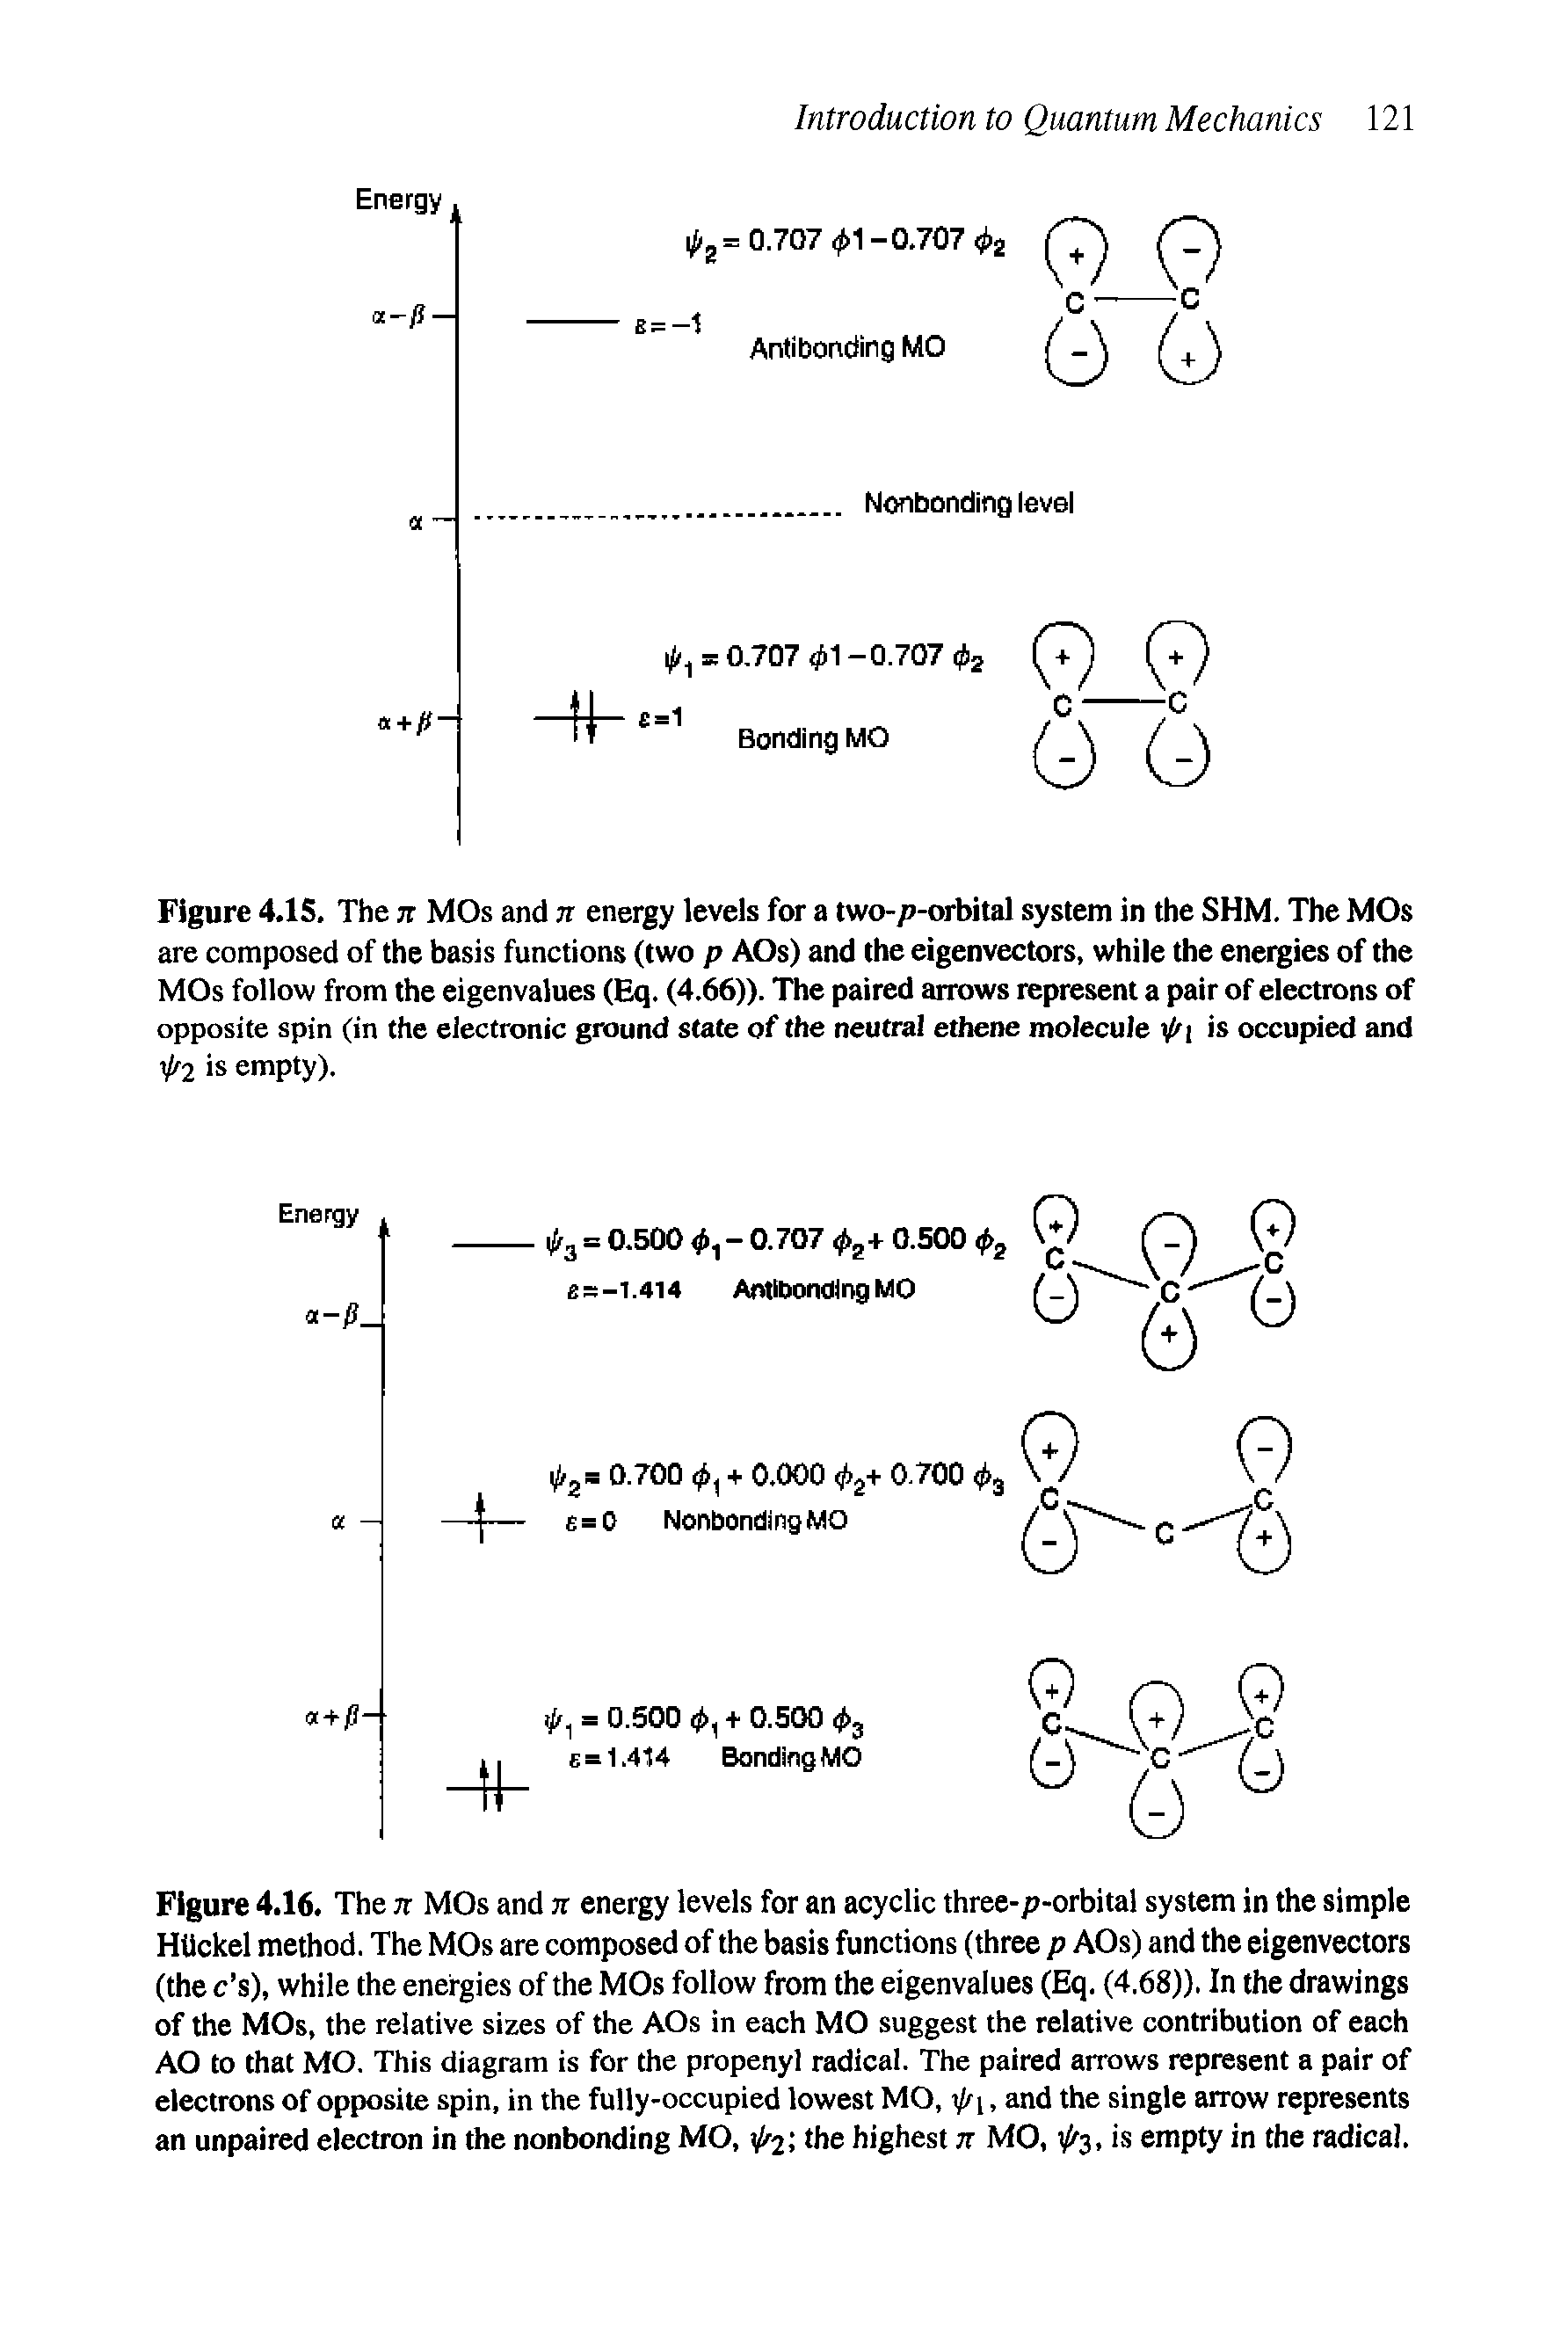 Figure 4.16. The n MOs and jt energy levels for an acyclic three-p-orbital system in the simple Htickel method. The MOs are composed of the basis functions (three p AOs) and the eigenvectors (the c s), while the energies of the MOs follow from the eigenvalues (Eq. (4.68)), In the drawings of the MOs, the relative sizes of the AOs in each MO suggest the relative contribution of each AO to that MO. This diagram is for the propenyl radical. The paired arrows represent a pair of electrons of opposite spin, in the fully-occupied lowest MO,, and the single arrow represents an unpaired electron in the nonbonding MO, 4 2> tlie highest n MO, fs, is empty in the radical.